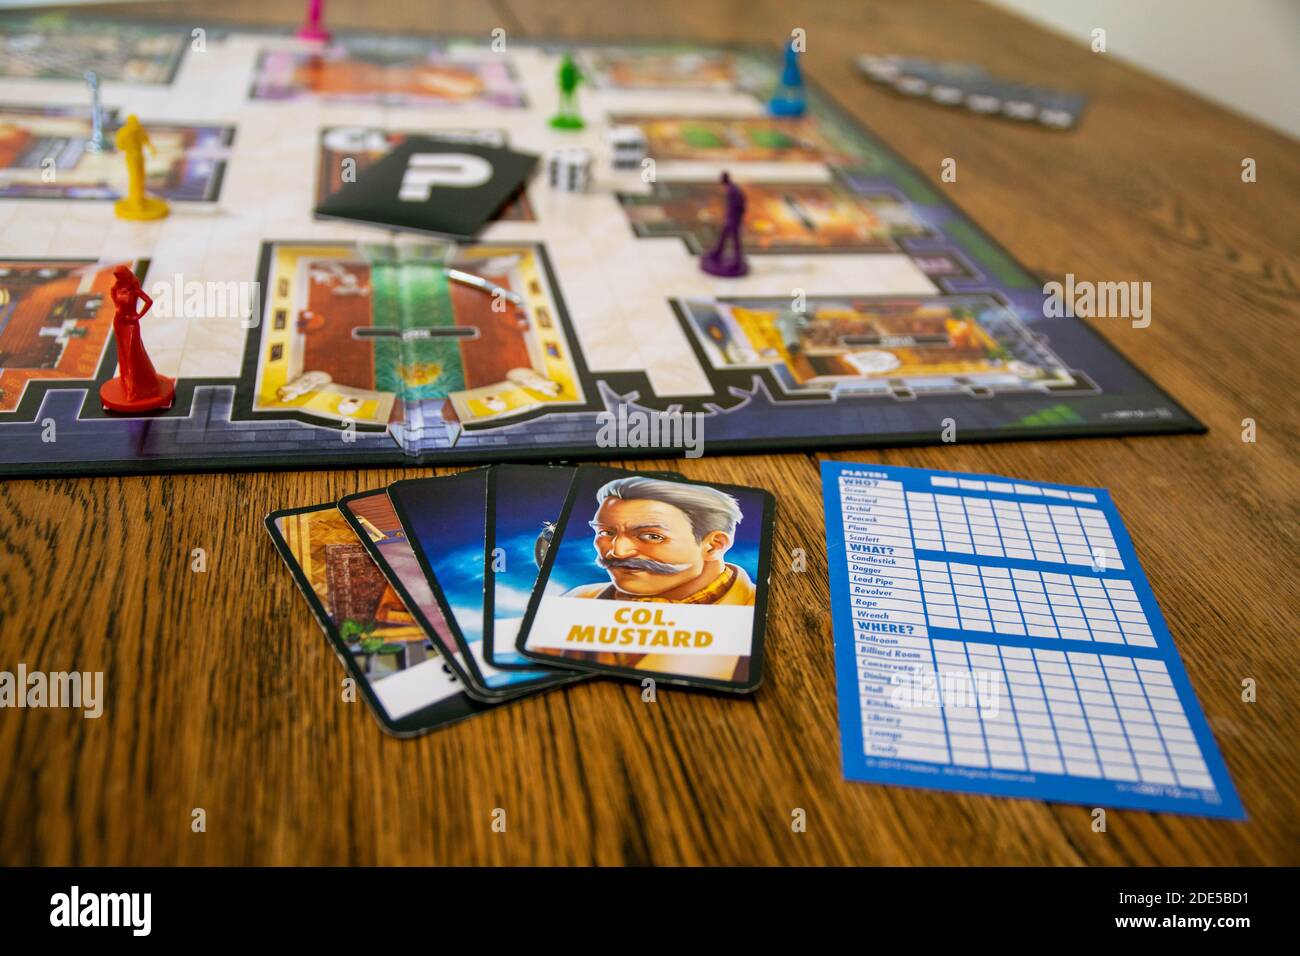 Cluedo is a Classic Murder Mystery Detective Board Game Editorial